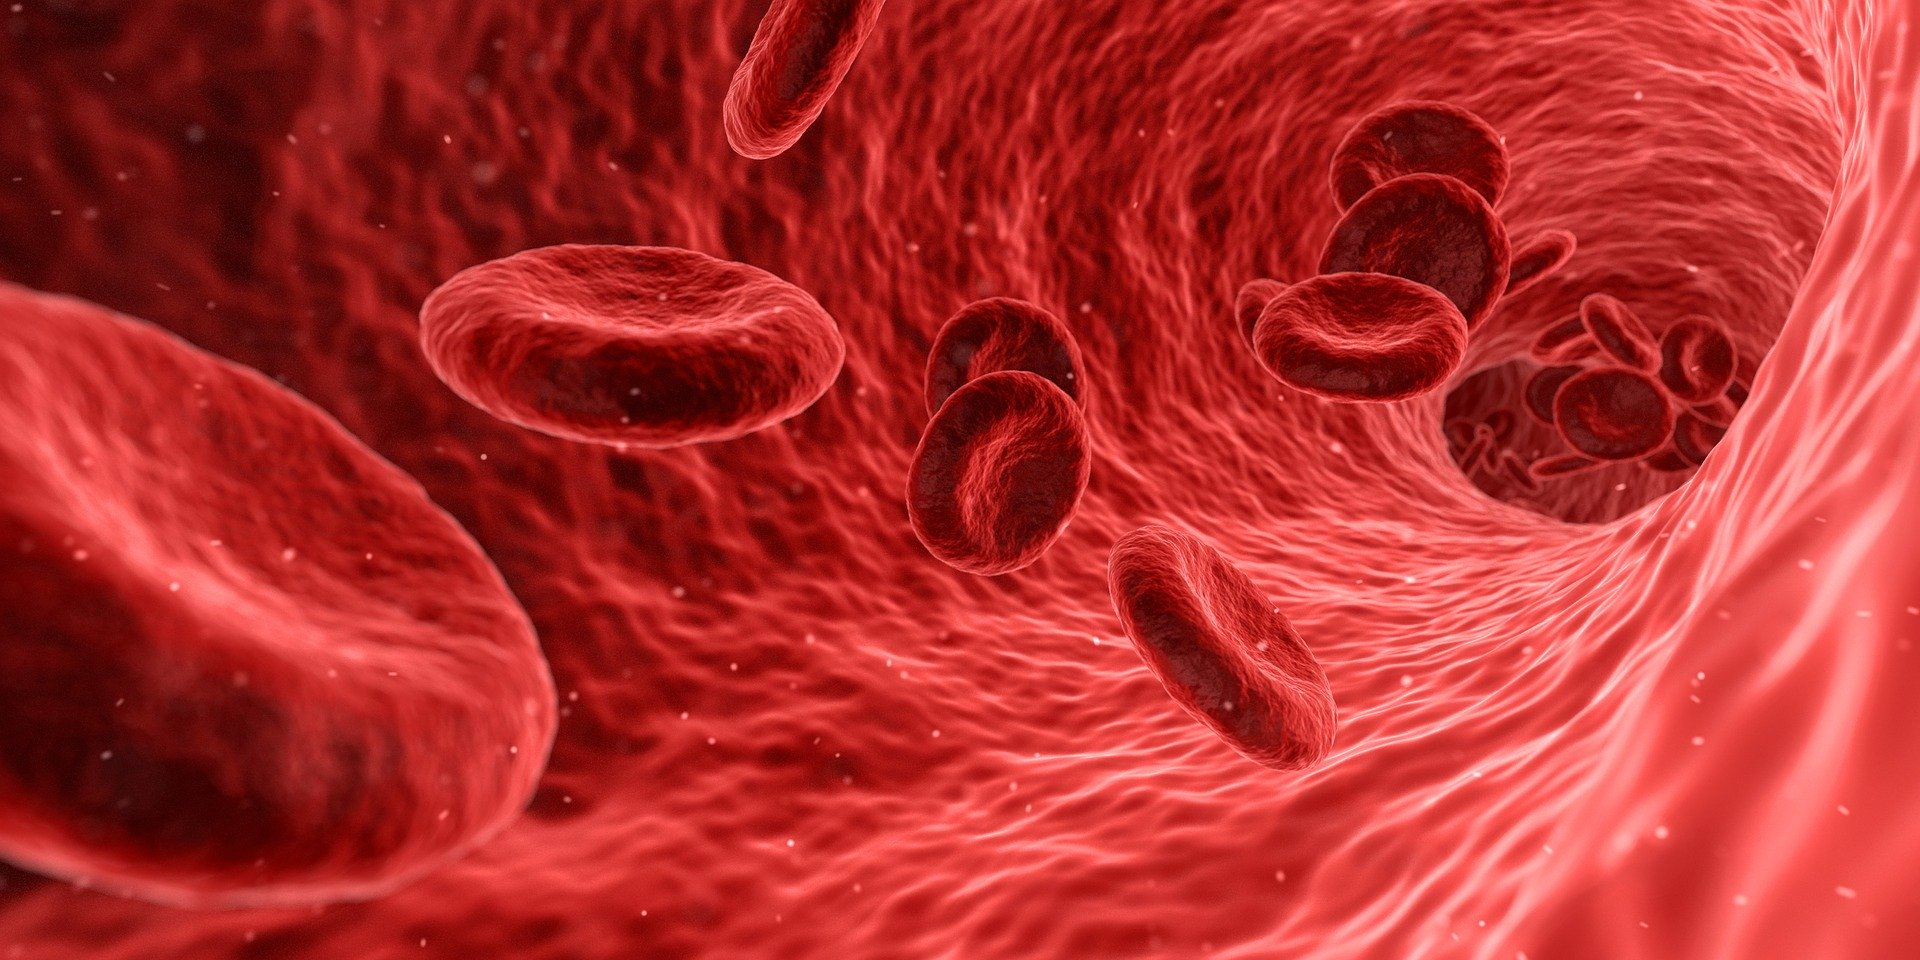 Blood flow showing red blood cells